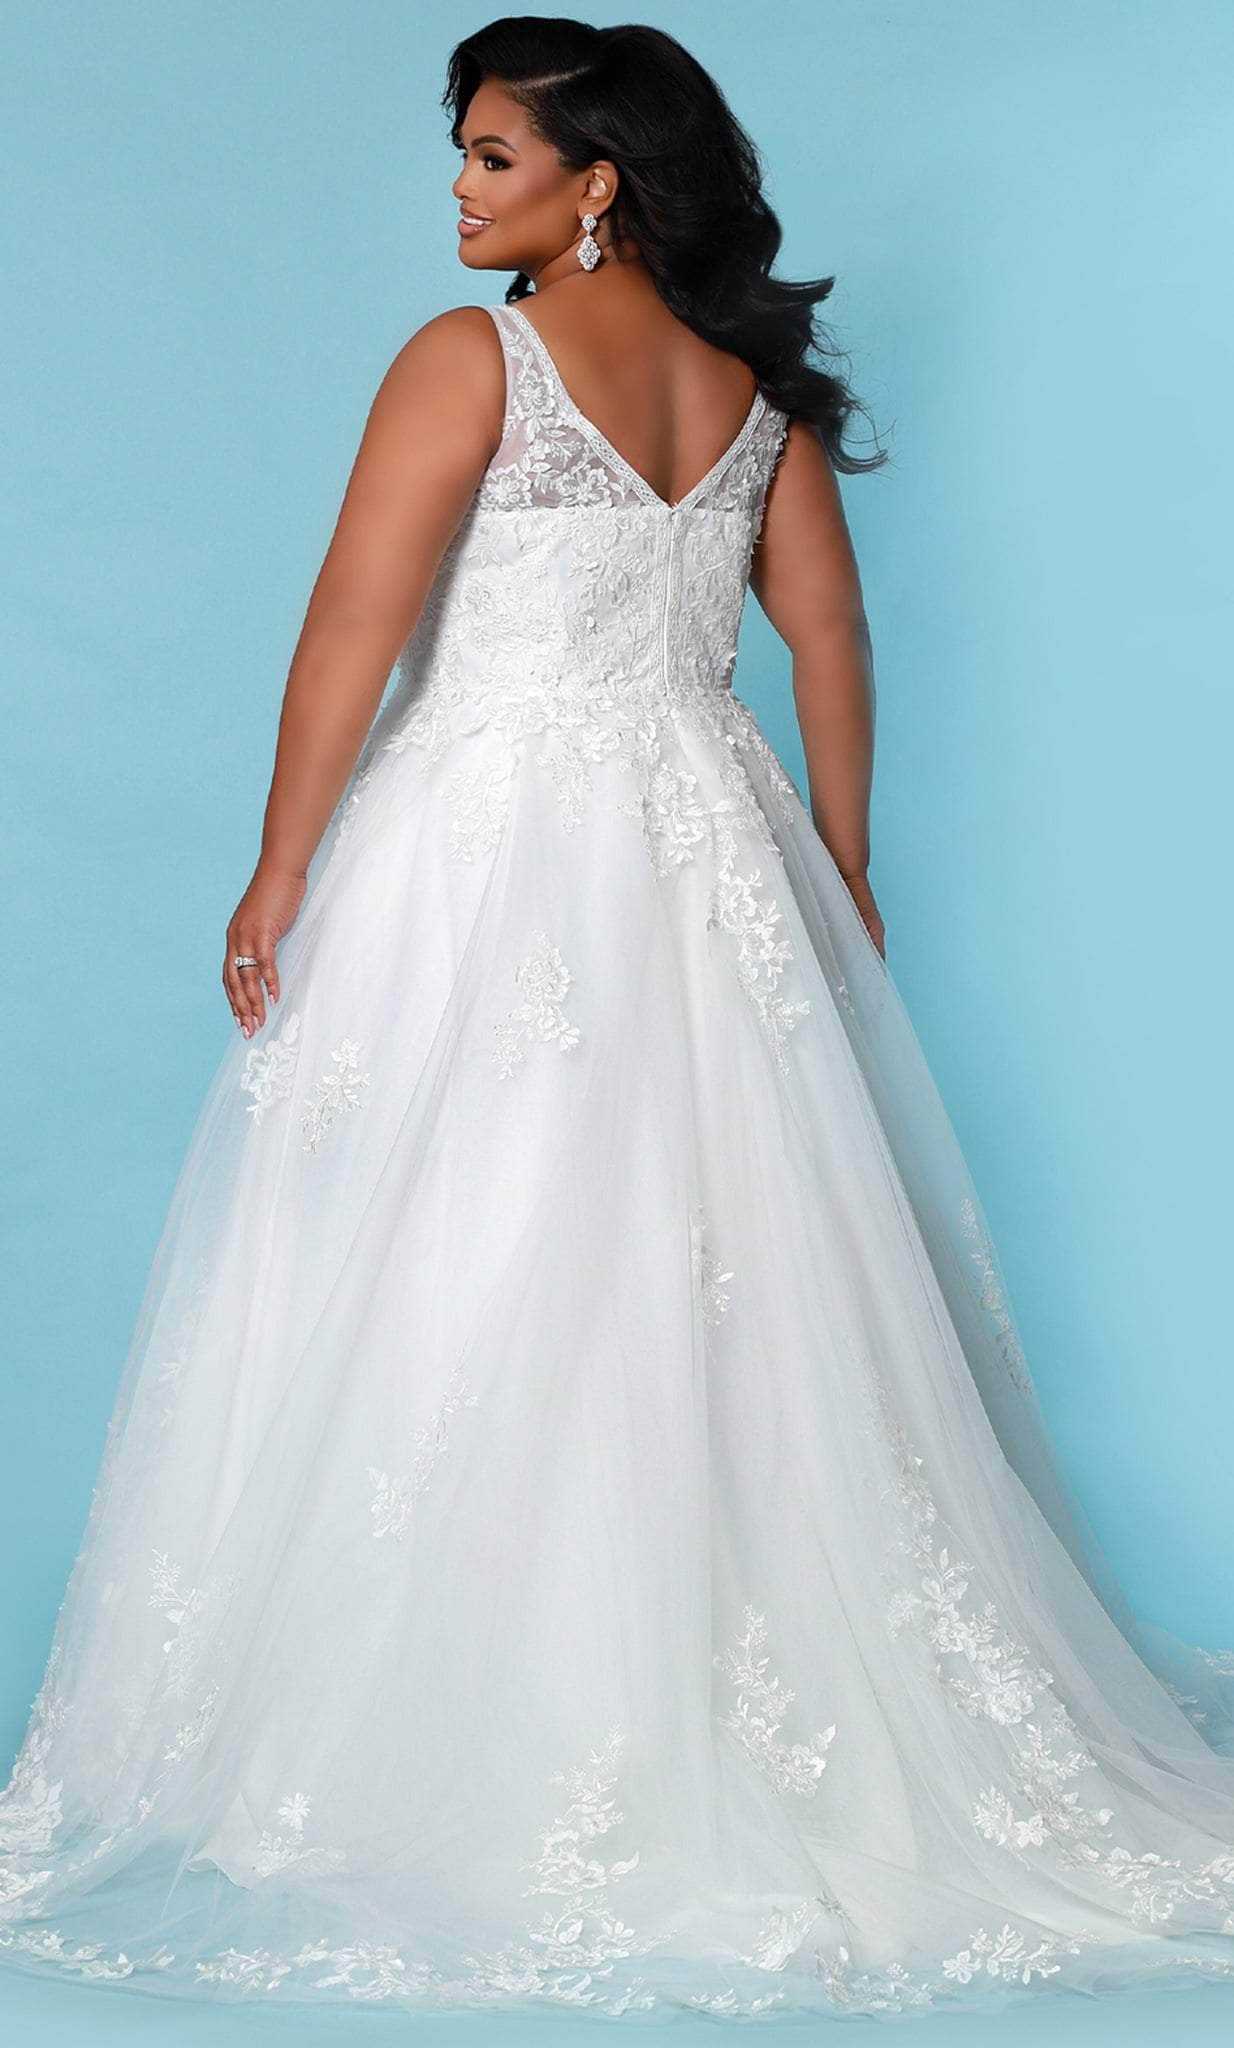 Sydney's Closet Bridal, Sydney's Closet Bridal SC5274 - Plunging Neck A-line Bridal Gown